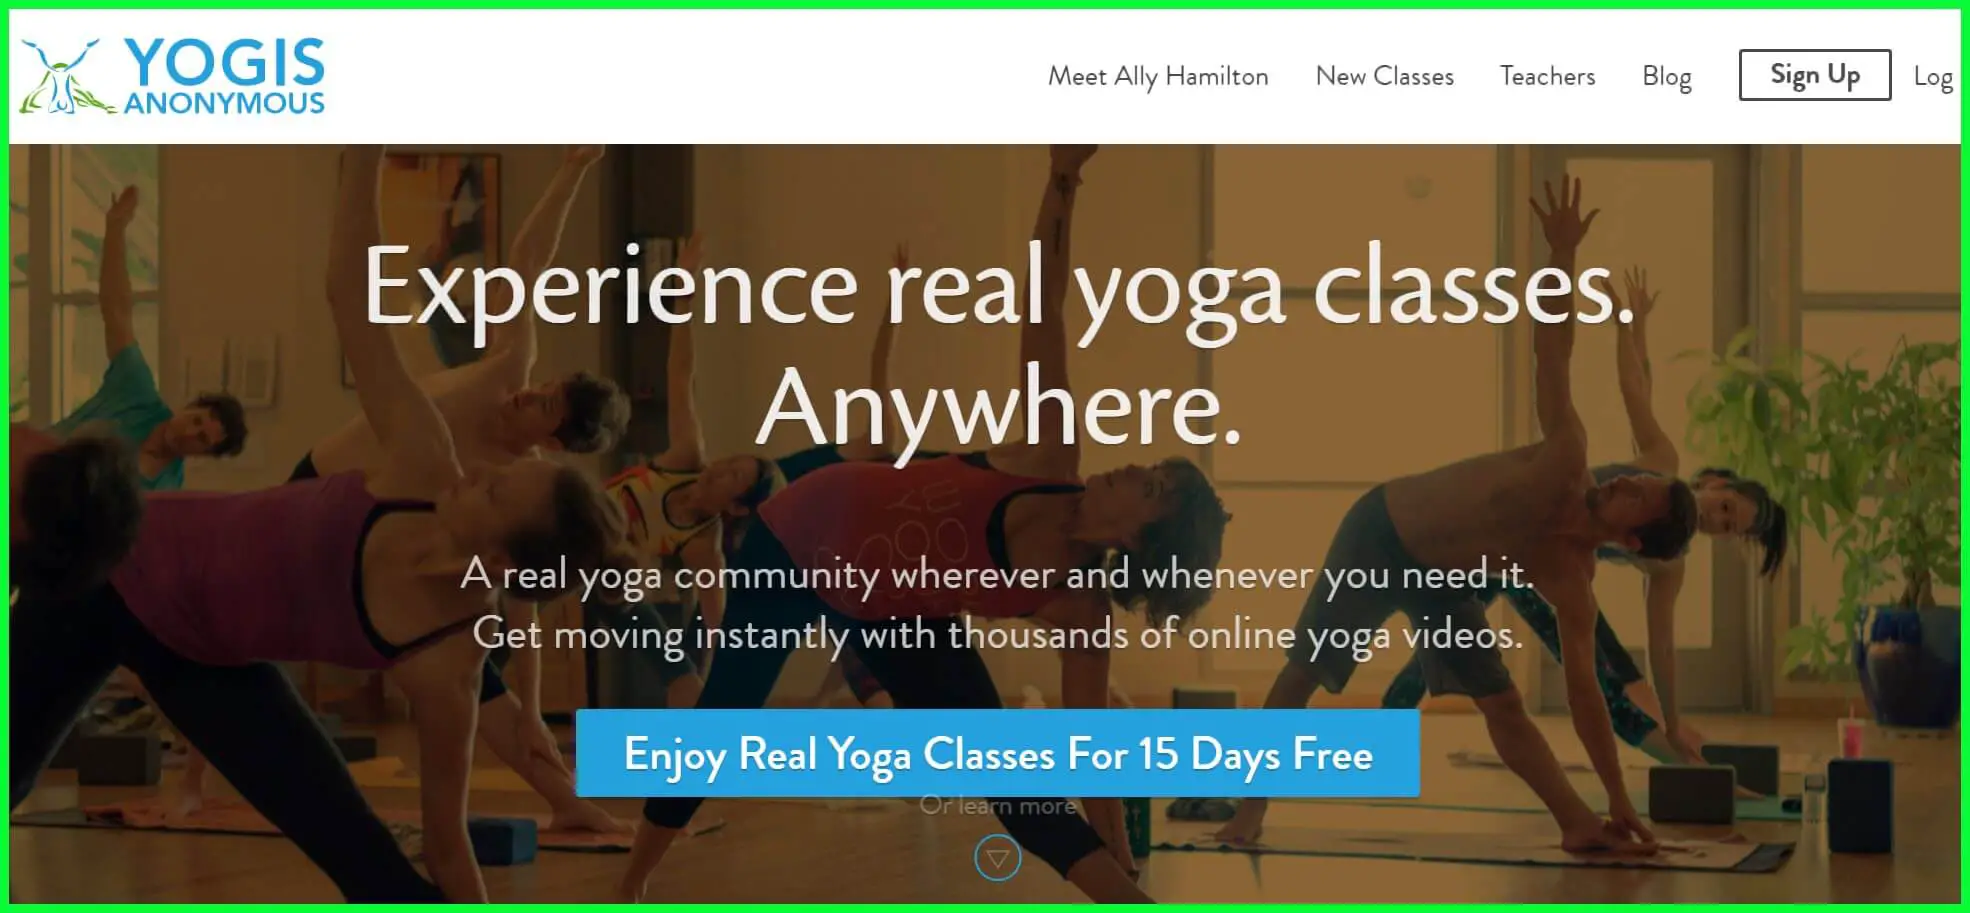 11 Of The Best Yoga Websites To Learn and Practicing Yoga